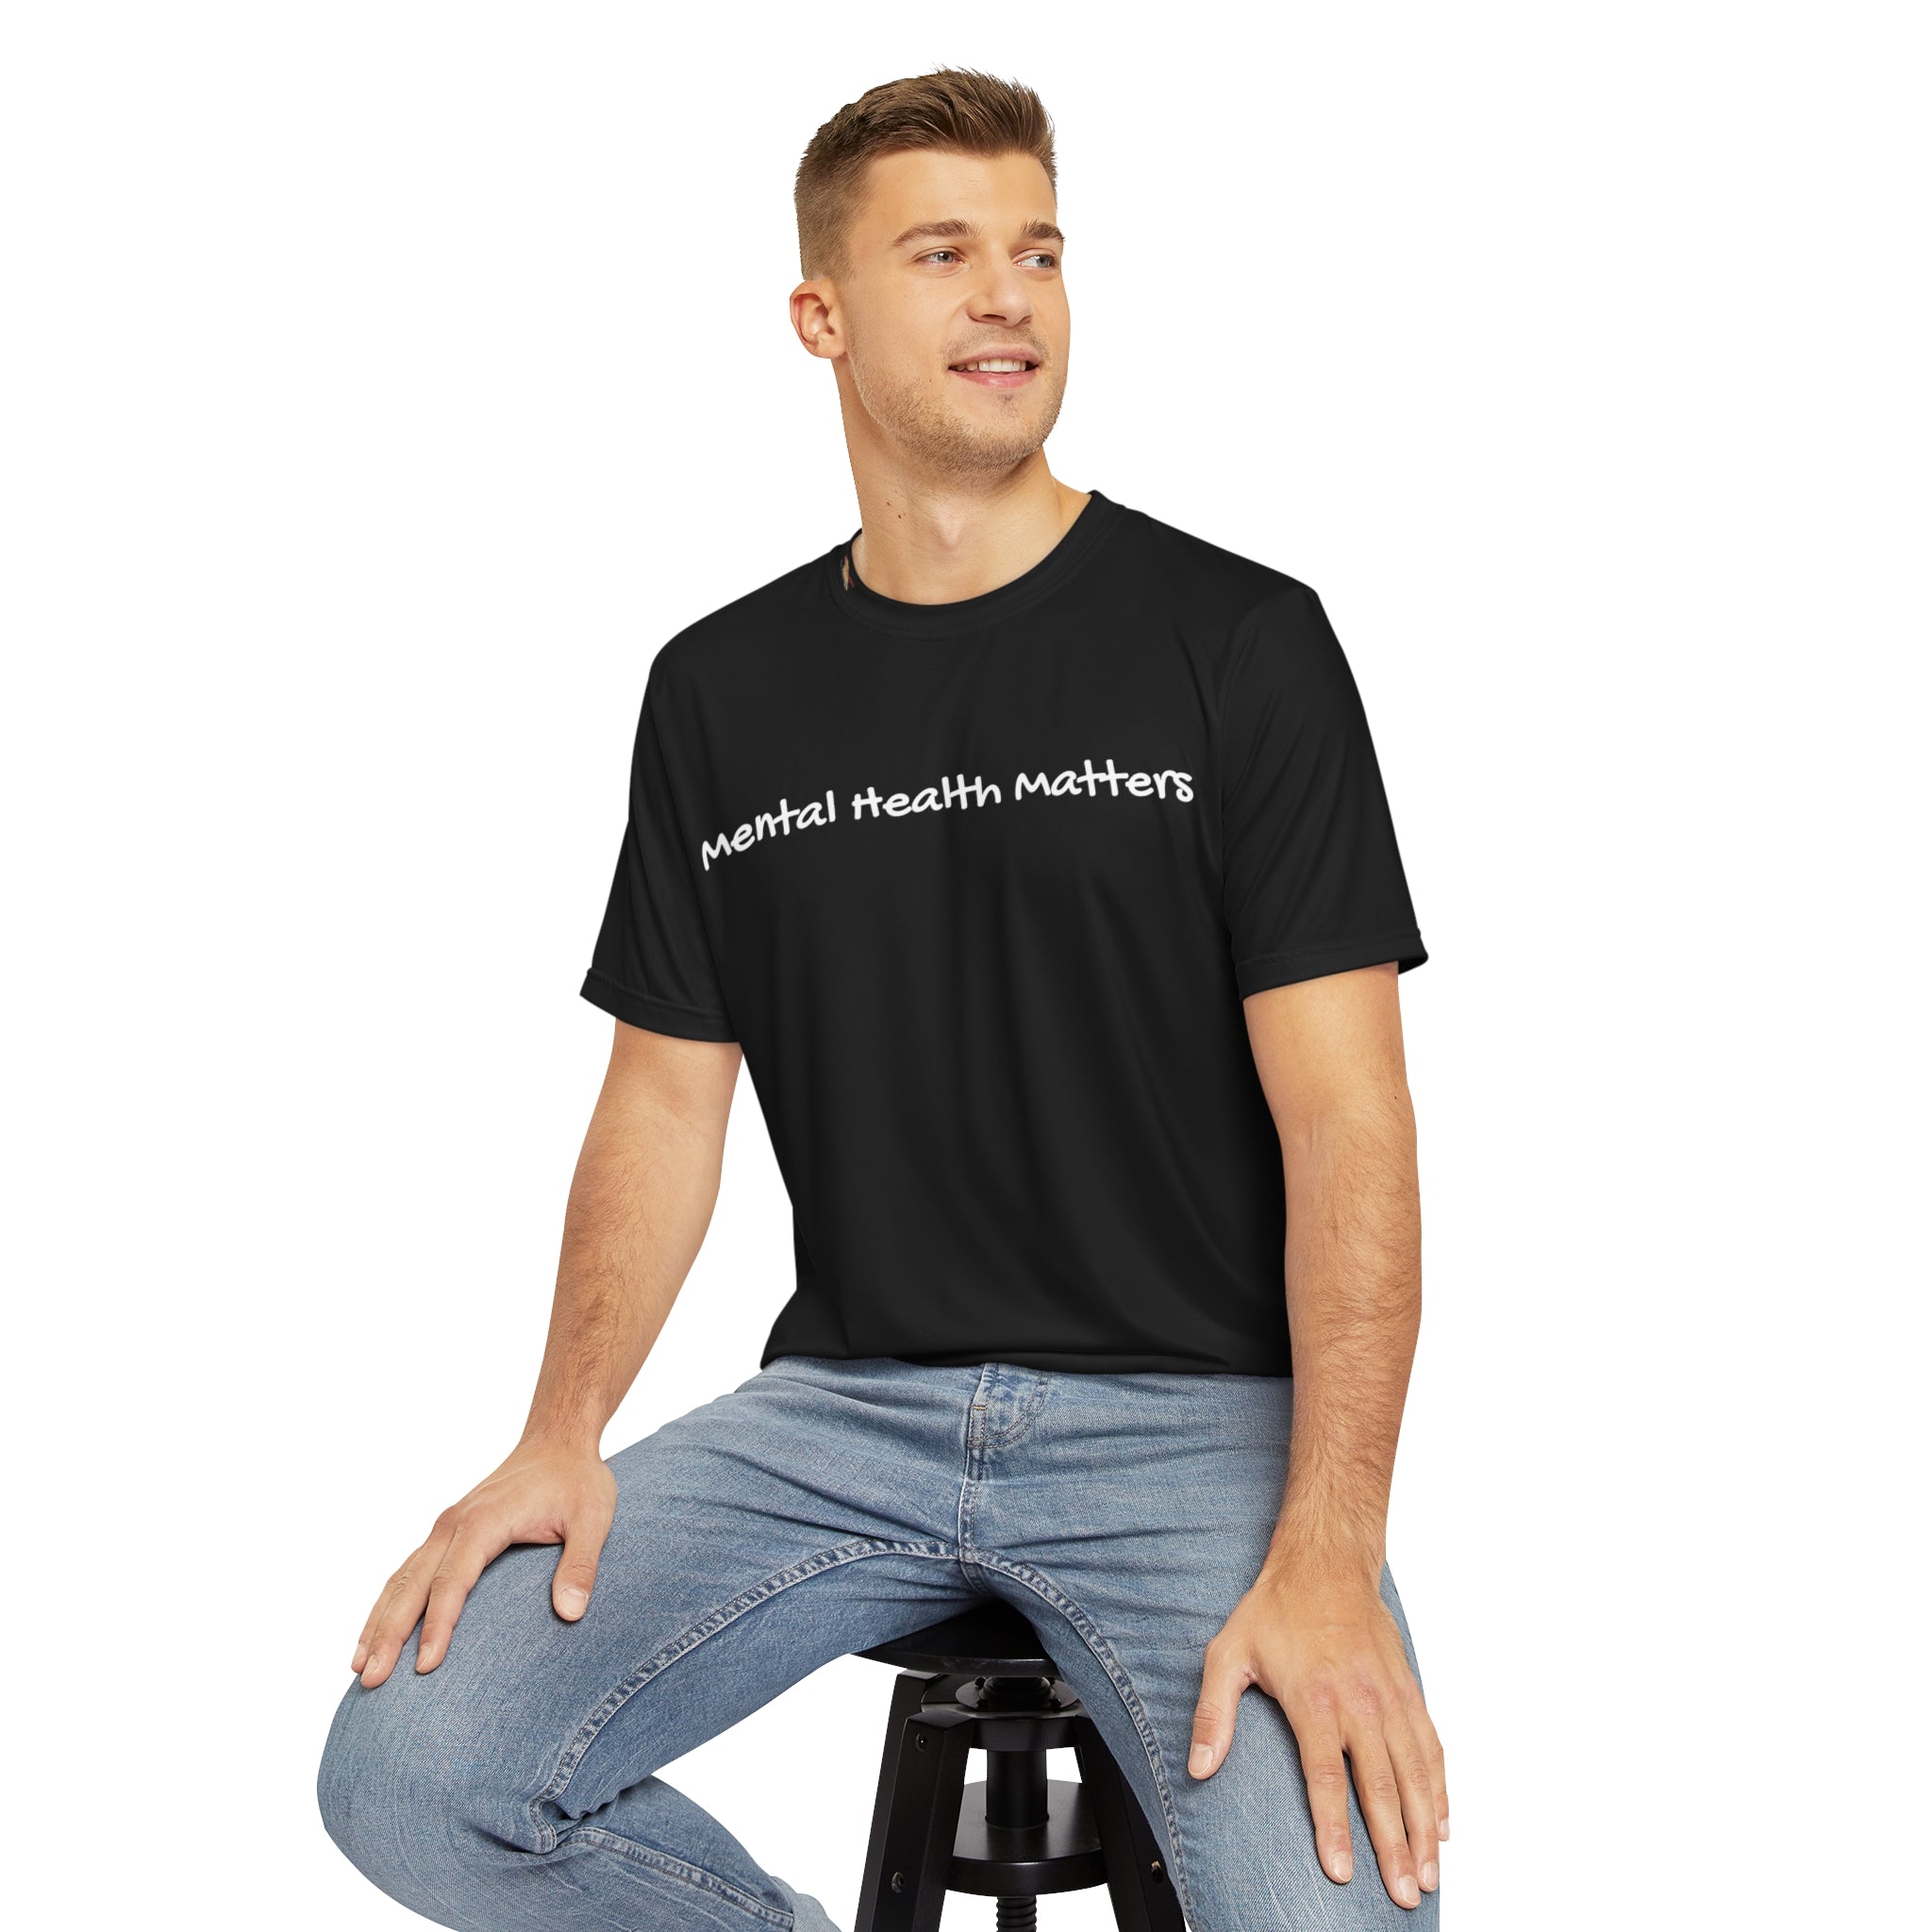 Mental Health Matters T-Shirt: Wear Your Support Athleisure Wear Comfort Masculinity Mental Wellness Pledge Donation Polyester All Over Prints 4008274517621778239_2048 Printify